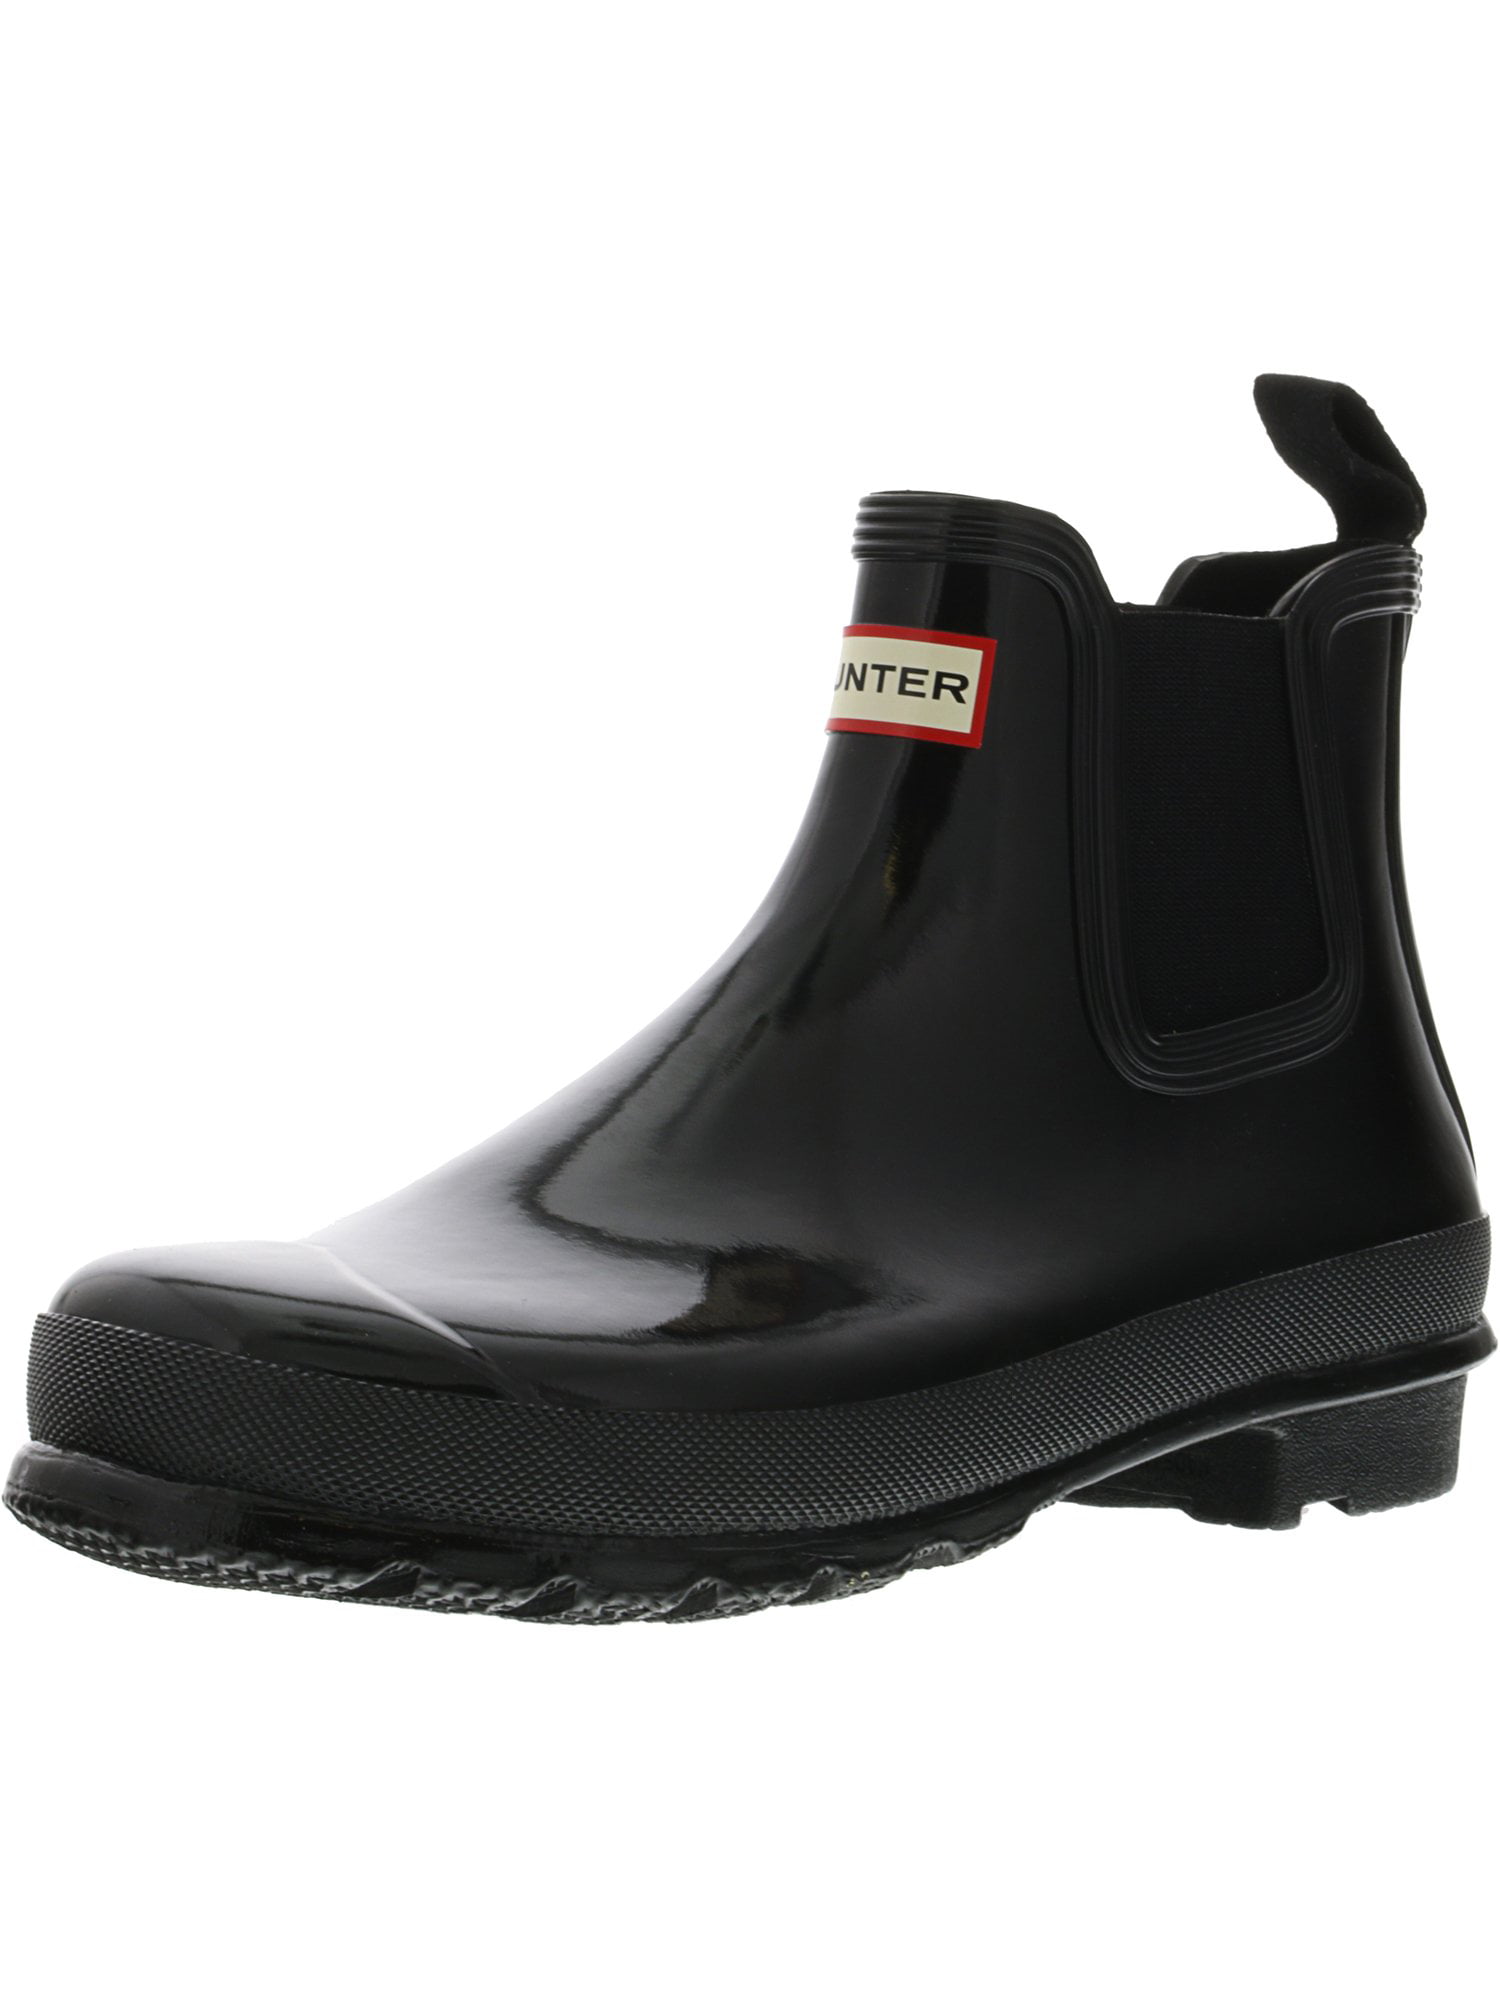 Ankle High Rubber Boots Top Sellers | bellvalefarms.com